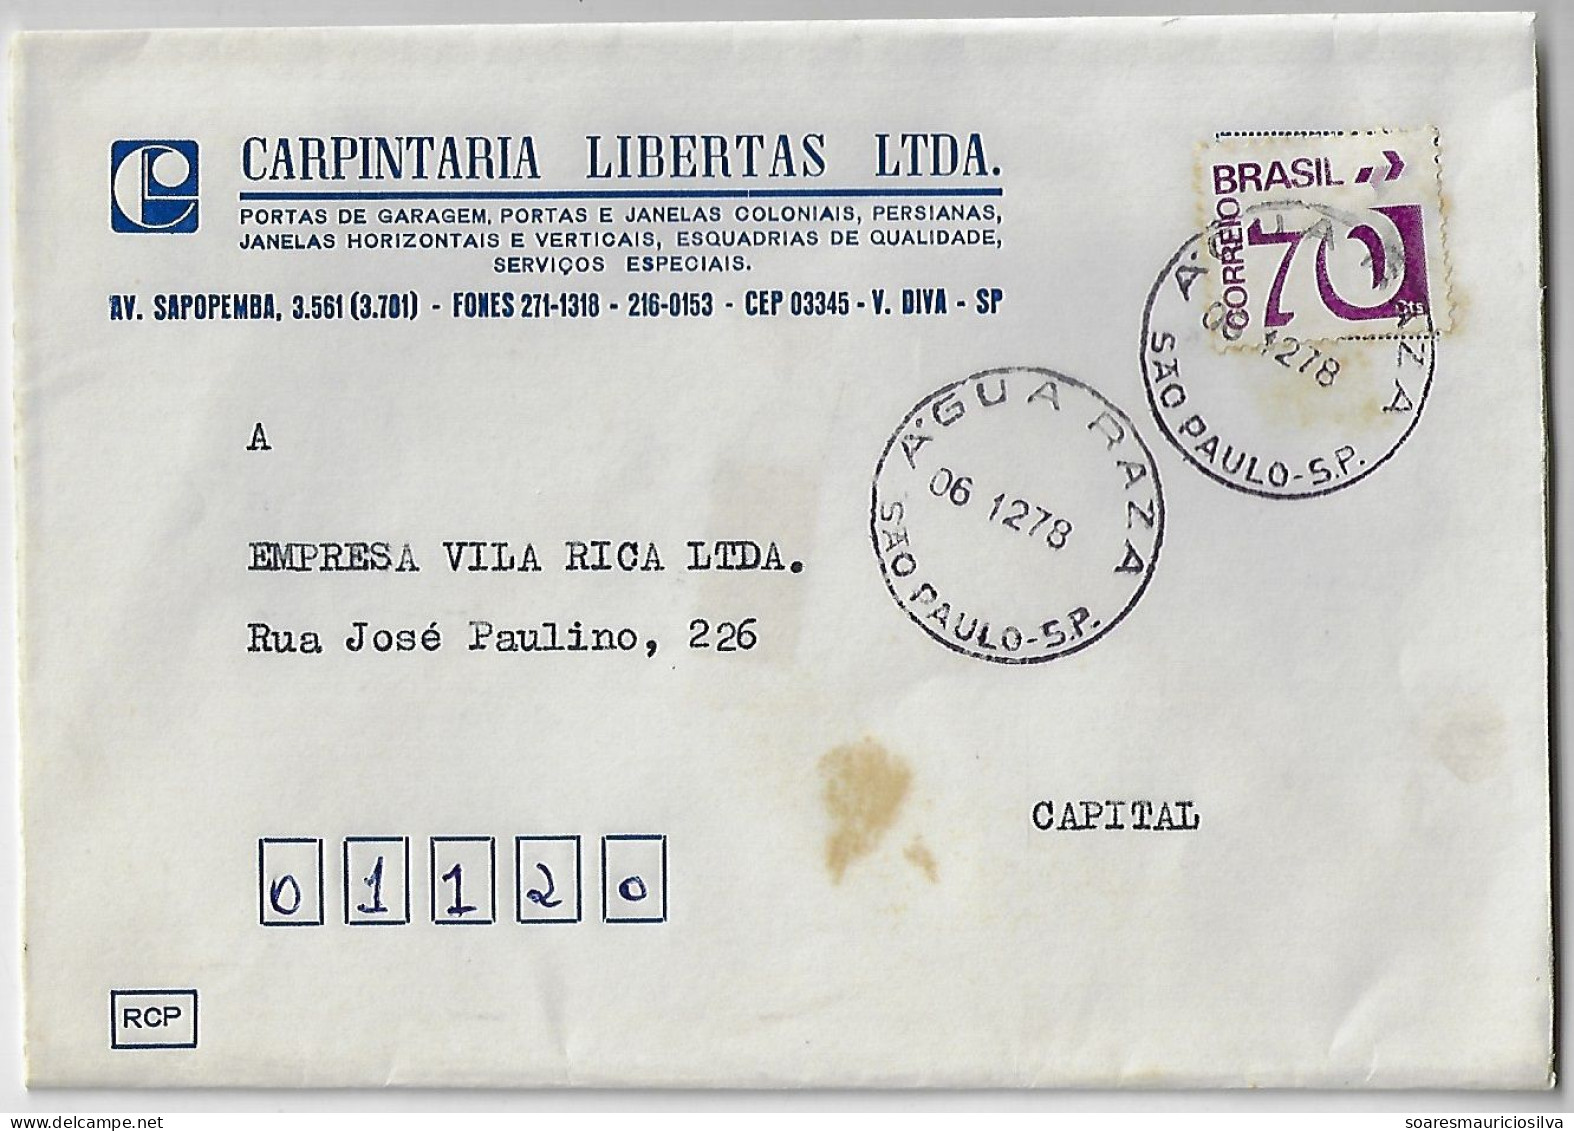 Brazil 1978 Carpentry Libertas Ltd Cover Shipped In São Paulo Agency Água Raza (shallow Water) Definitive Stamp 70 Cents - Covers & Documents